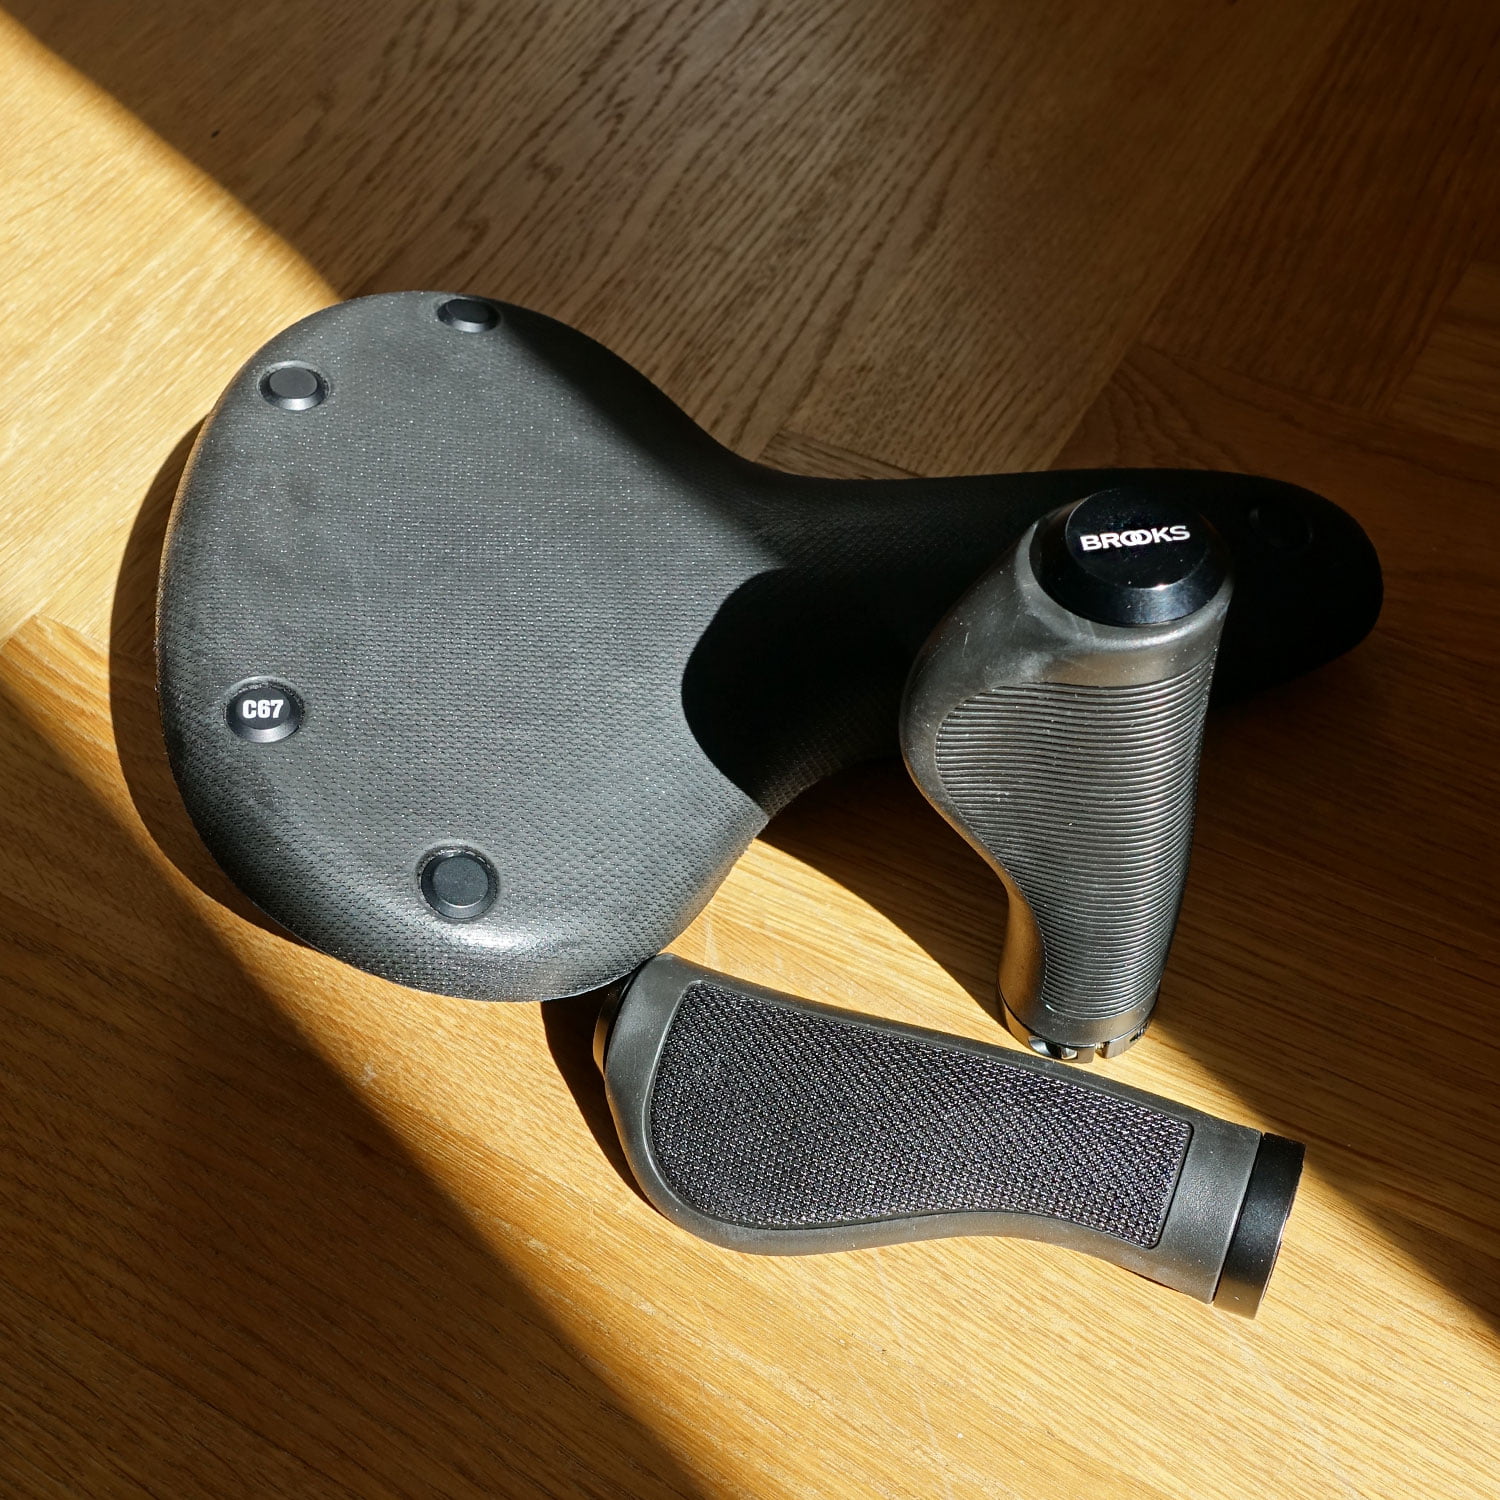 The new Brooks Cambium C67 saddle with 